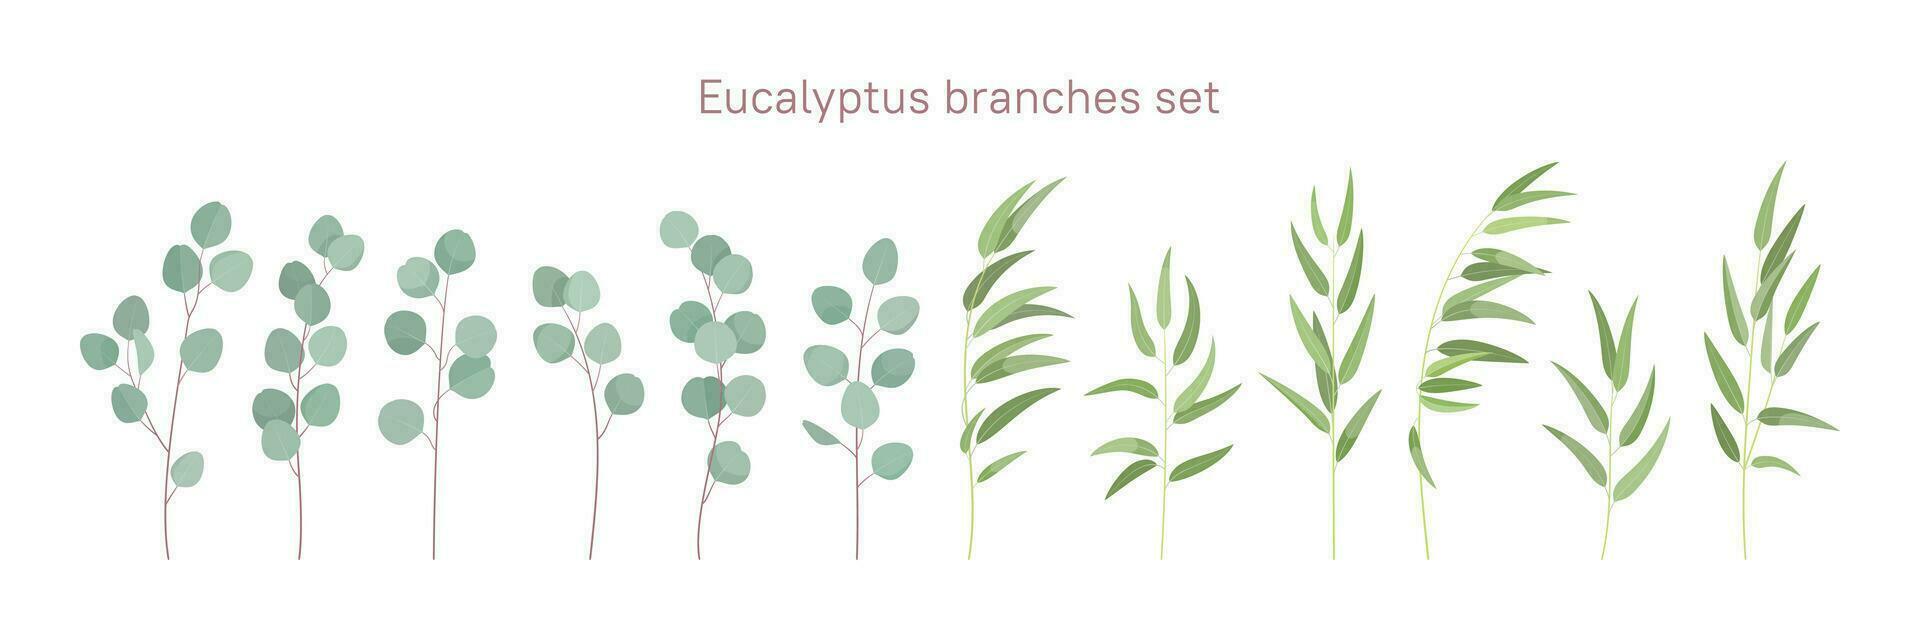 Eucalyptus branches set. Floral elements for your design in flat style. vector